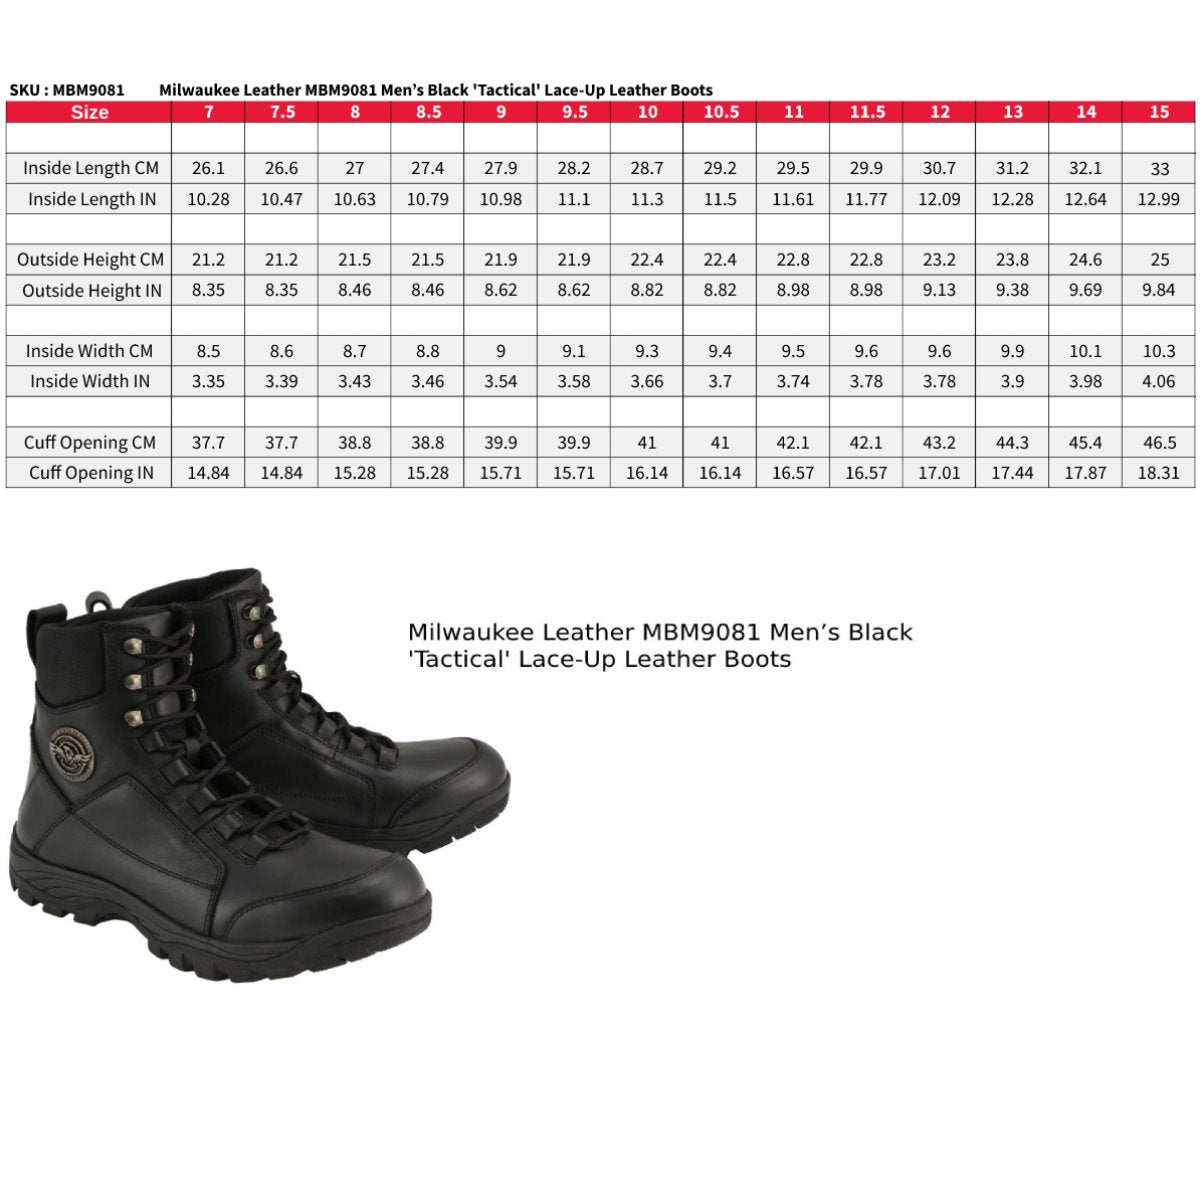 Milwaukee Leather MBM9081 Men’s Black Leather Swat Style-Tactical Lace-Up Motorcycle Riding Boots